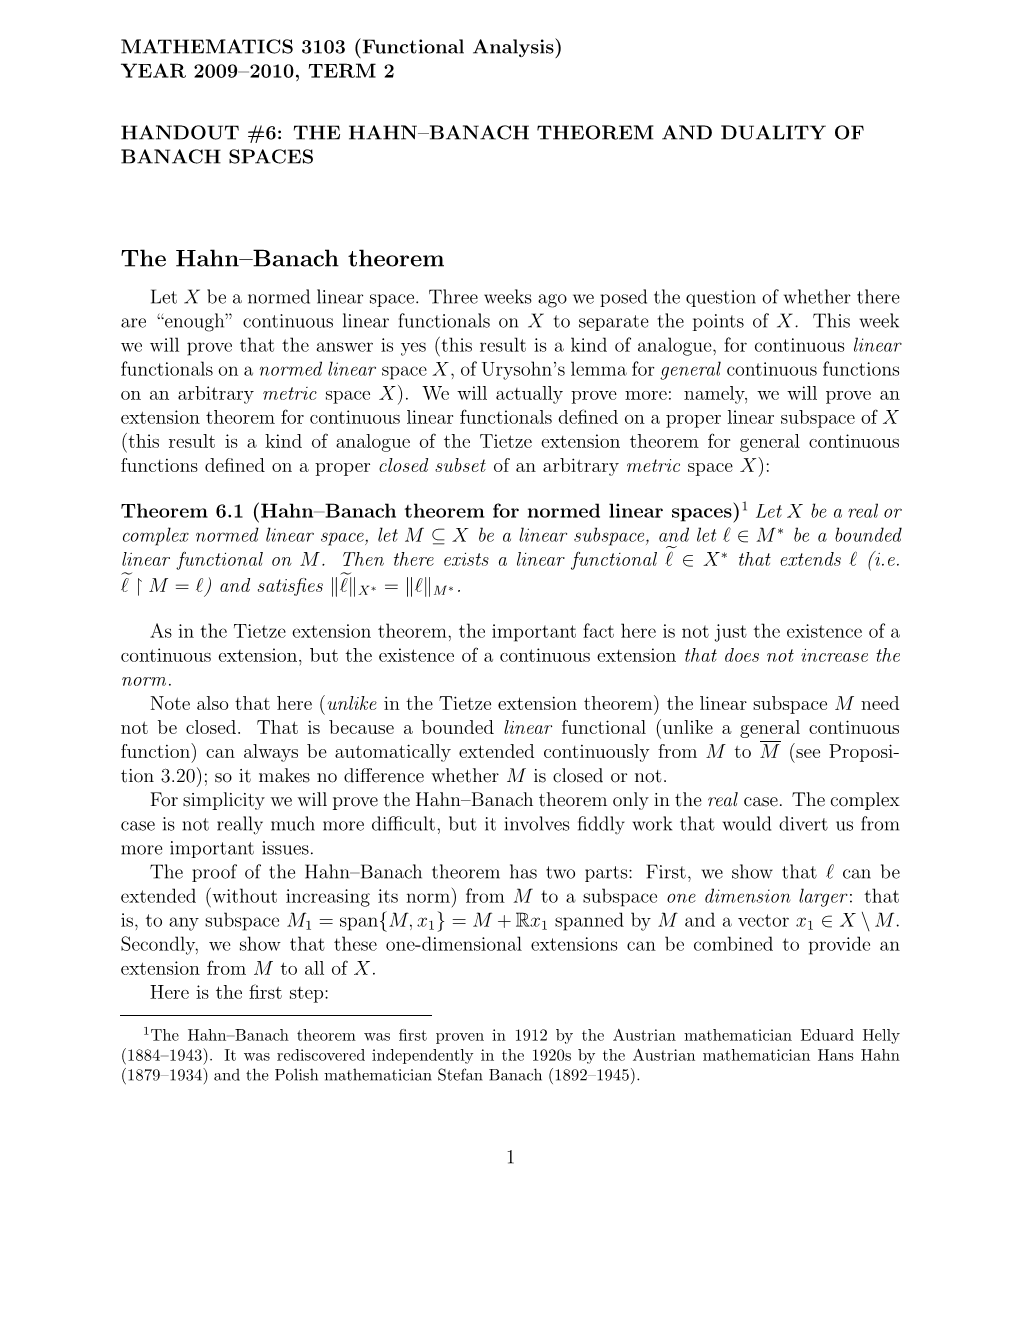 The Hahn–Banach Theorem and Duality of Banach Spaces